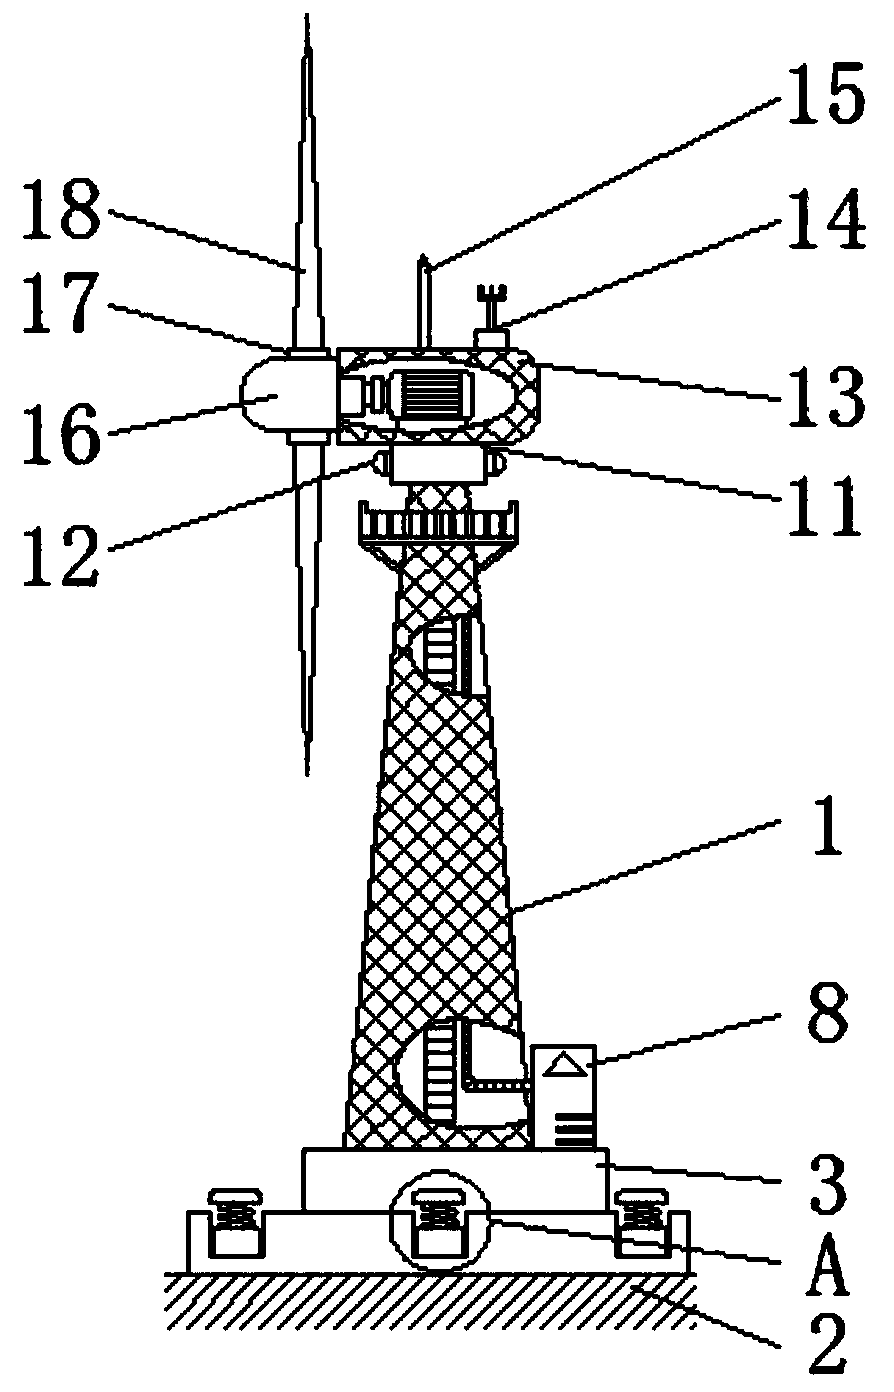 Double-feed type wind power generation equipment